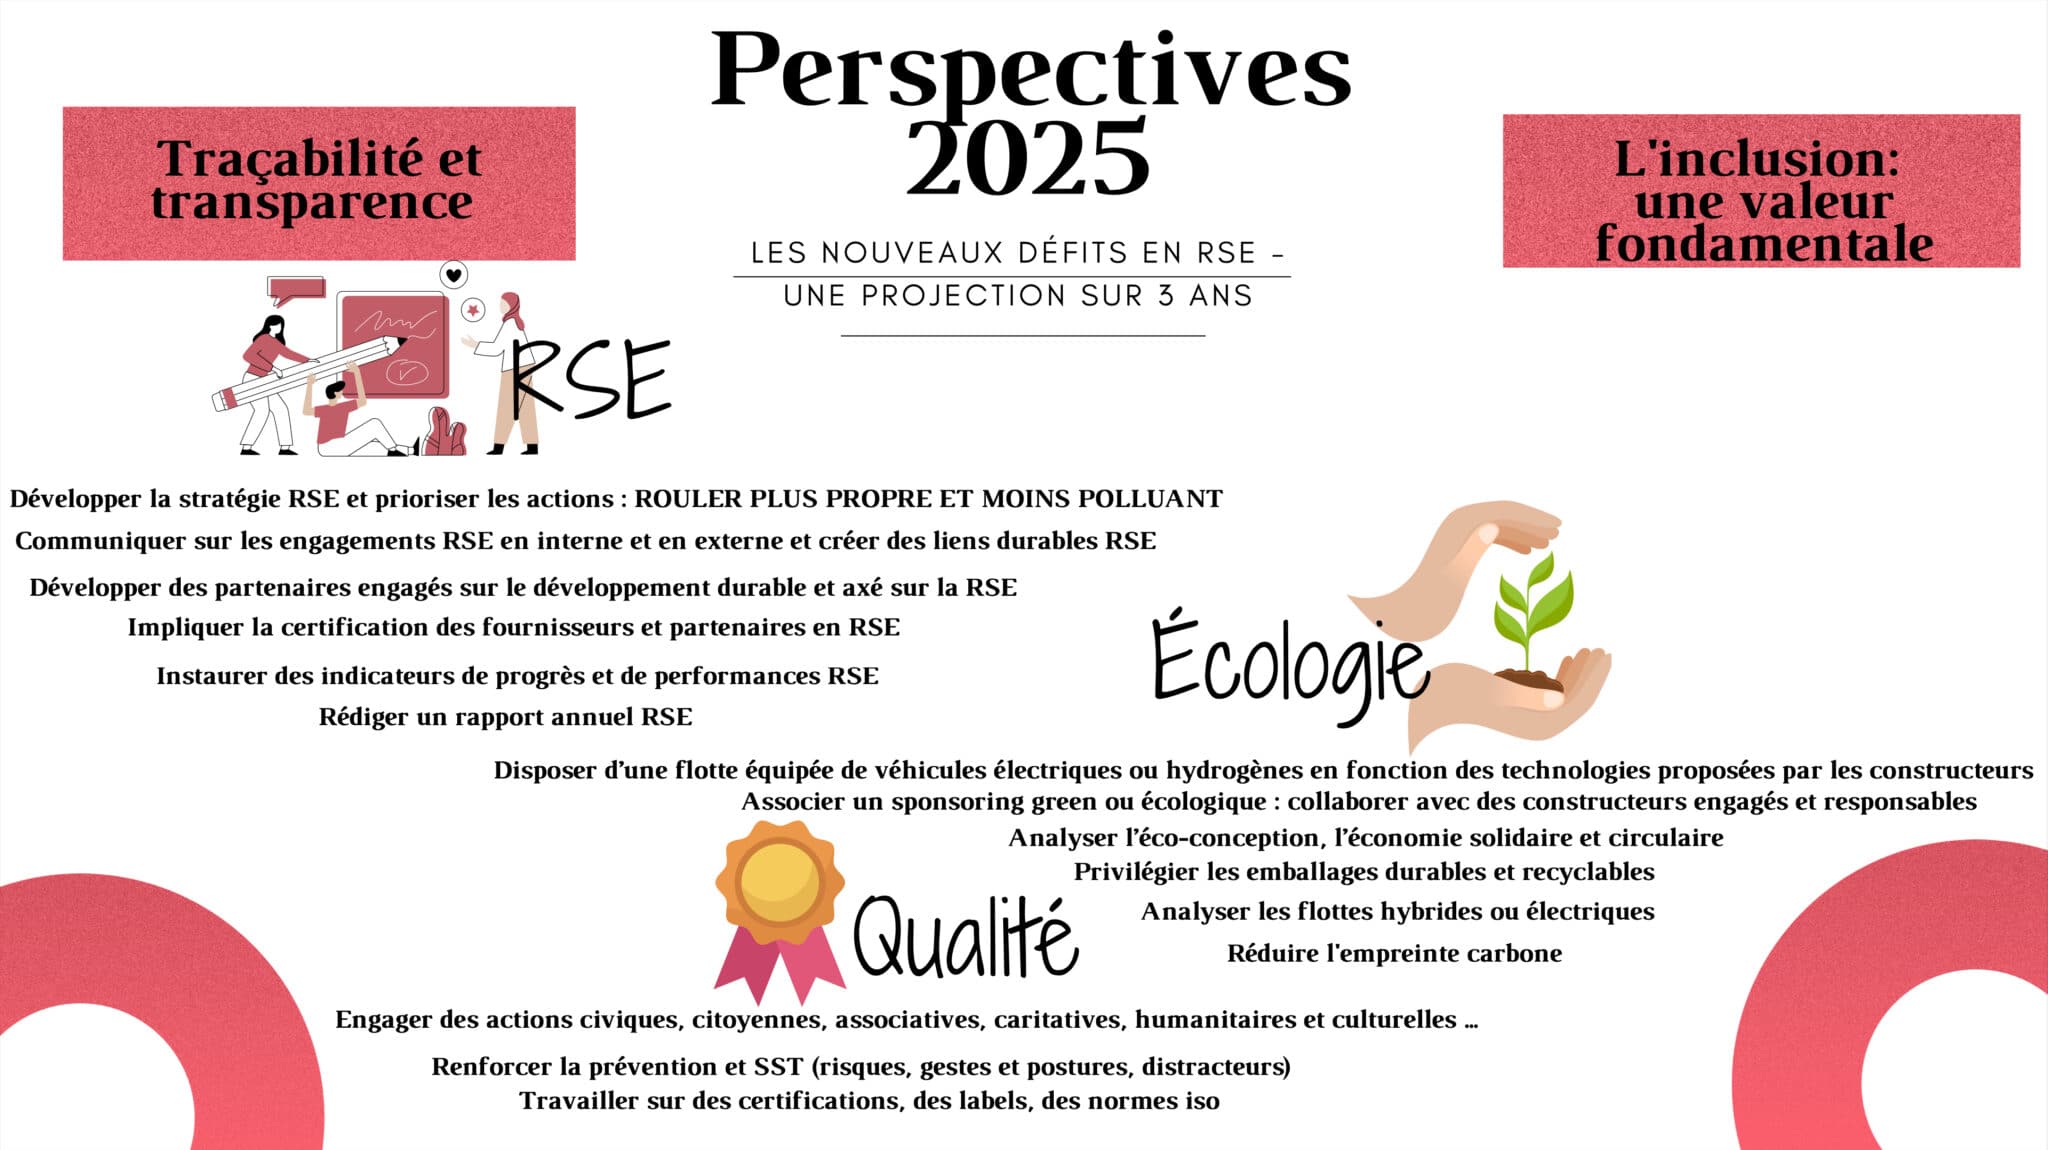 Perspectives 2025 Network Express